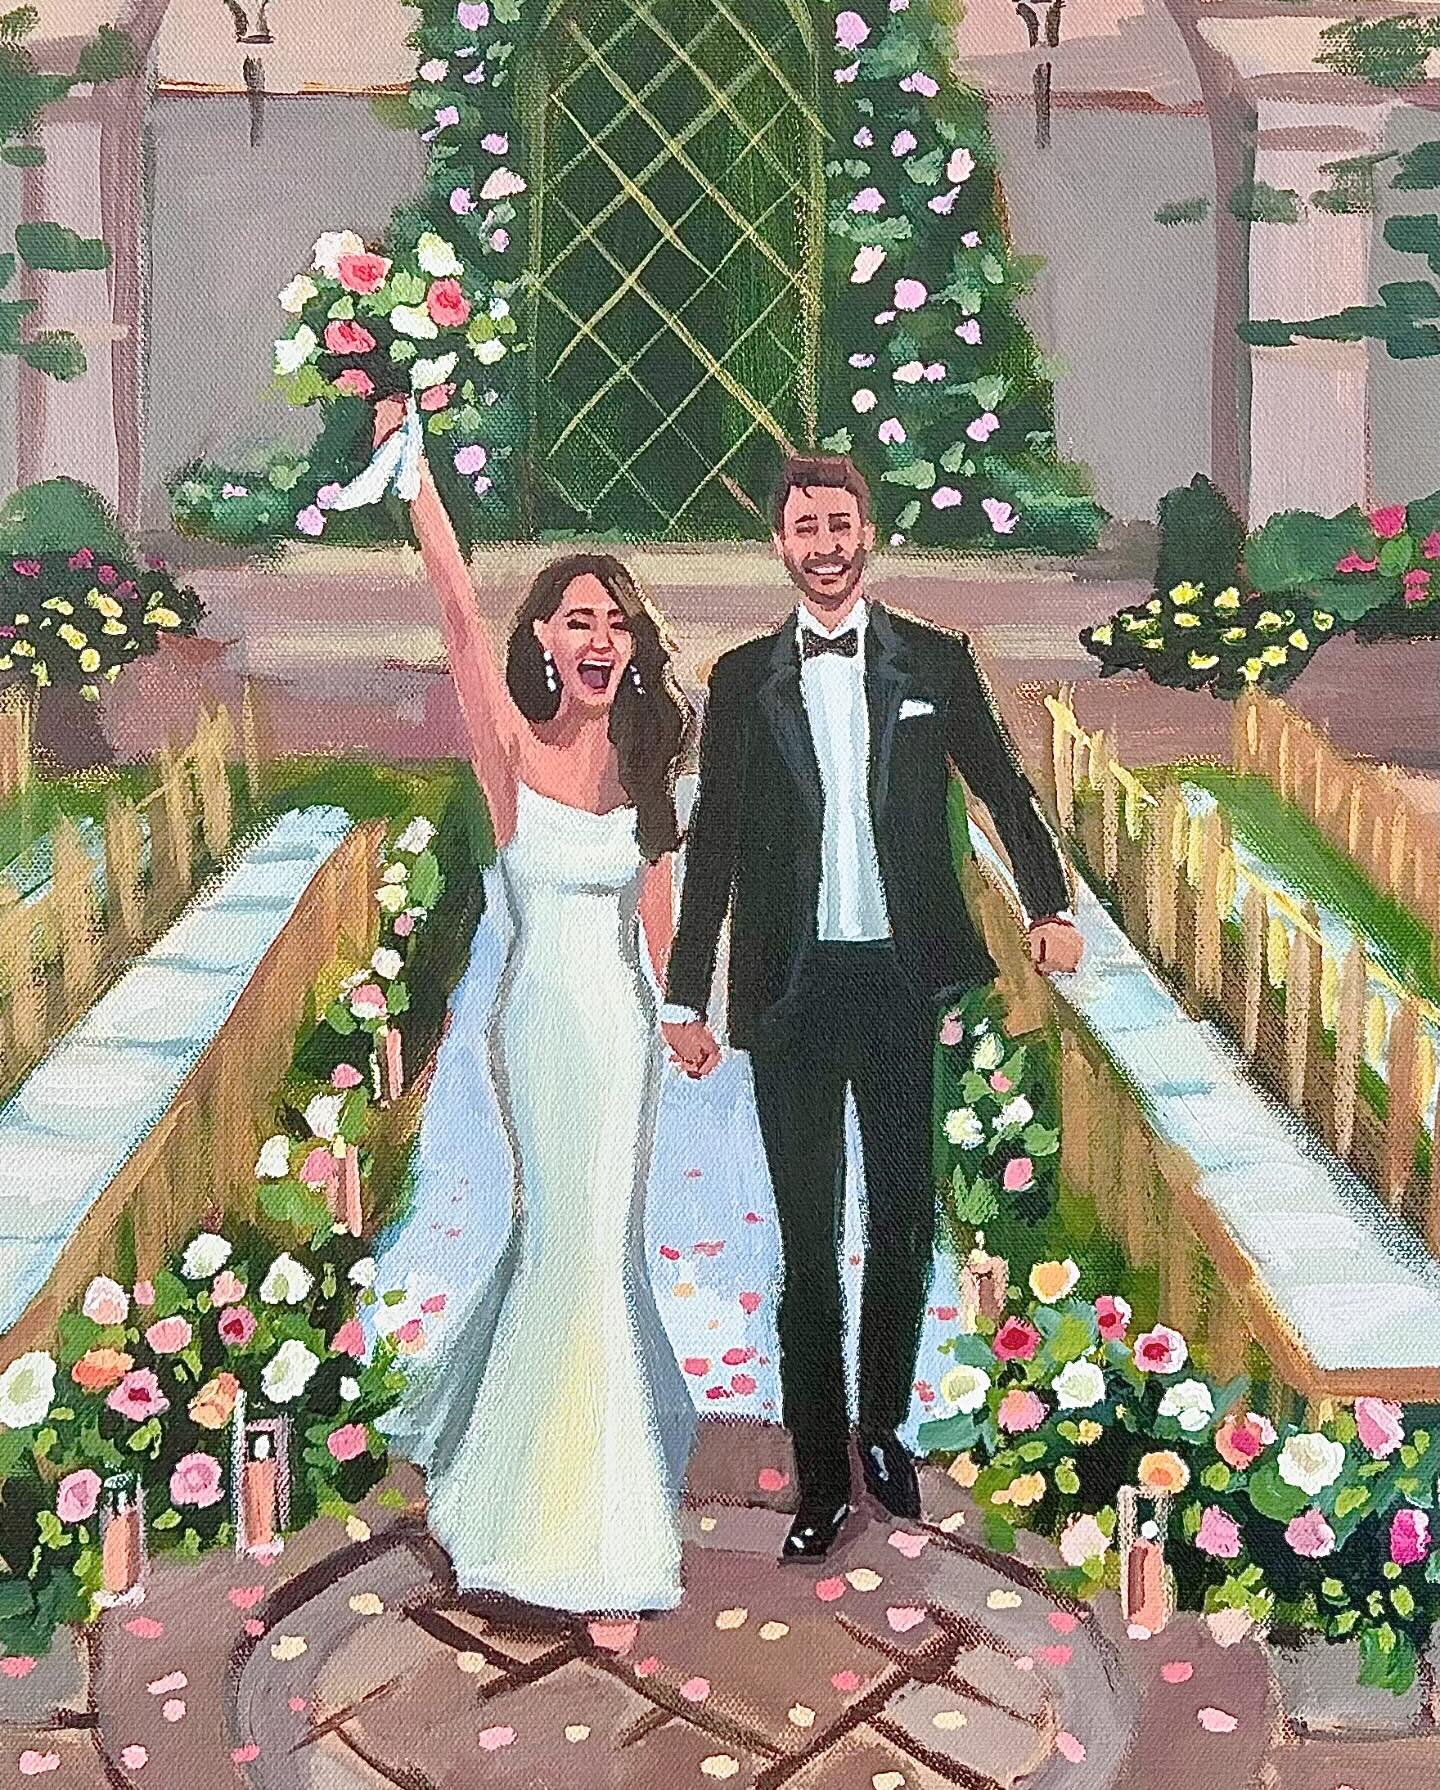 Still swooning over this wedding I had the pleasure to paint at🙏🏼😍

#livewedding #liveweddingpainting #liveweddingpainter #southernliving #southernartists #atlartists